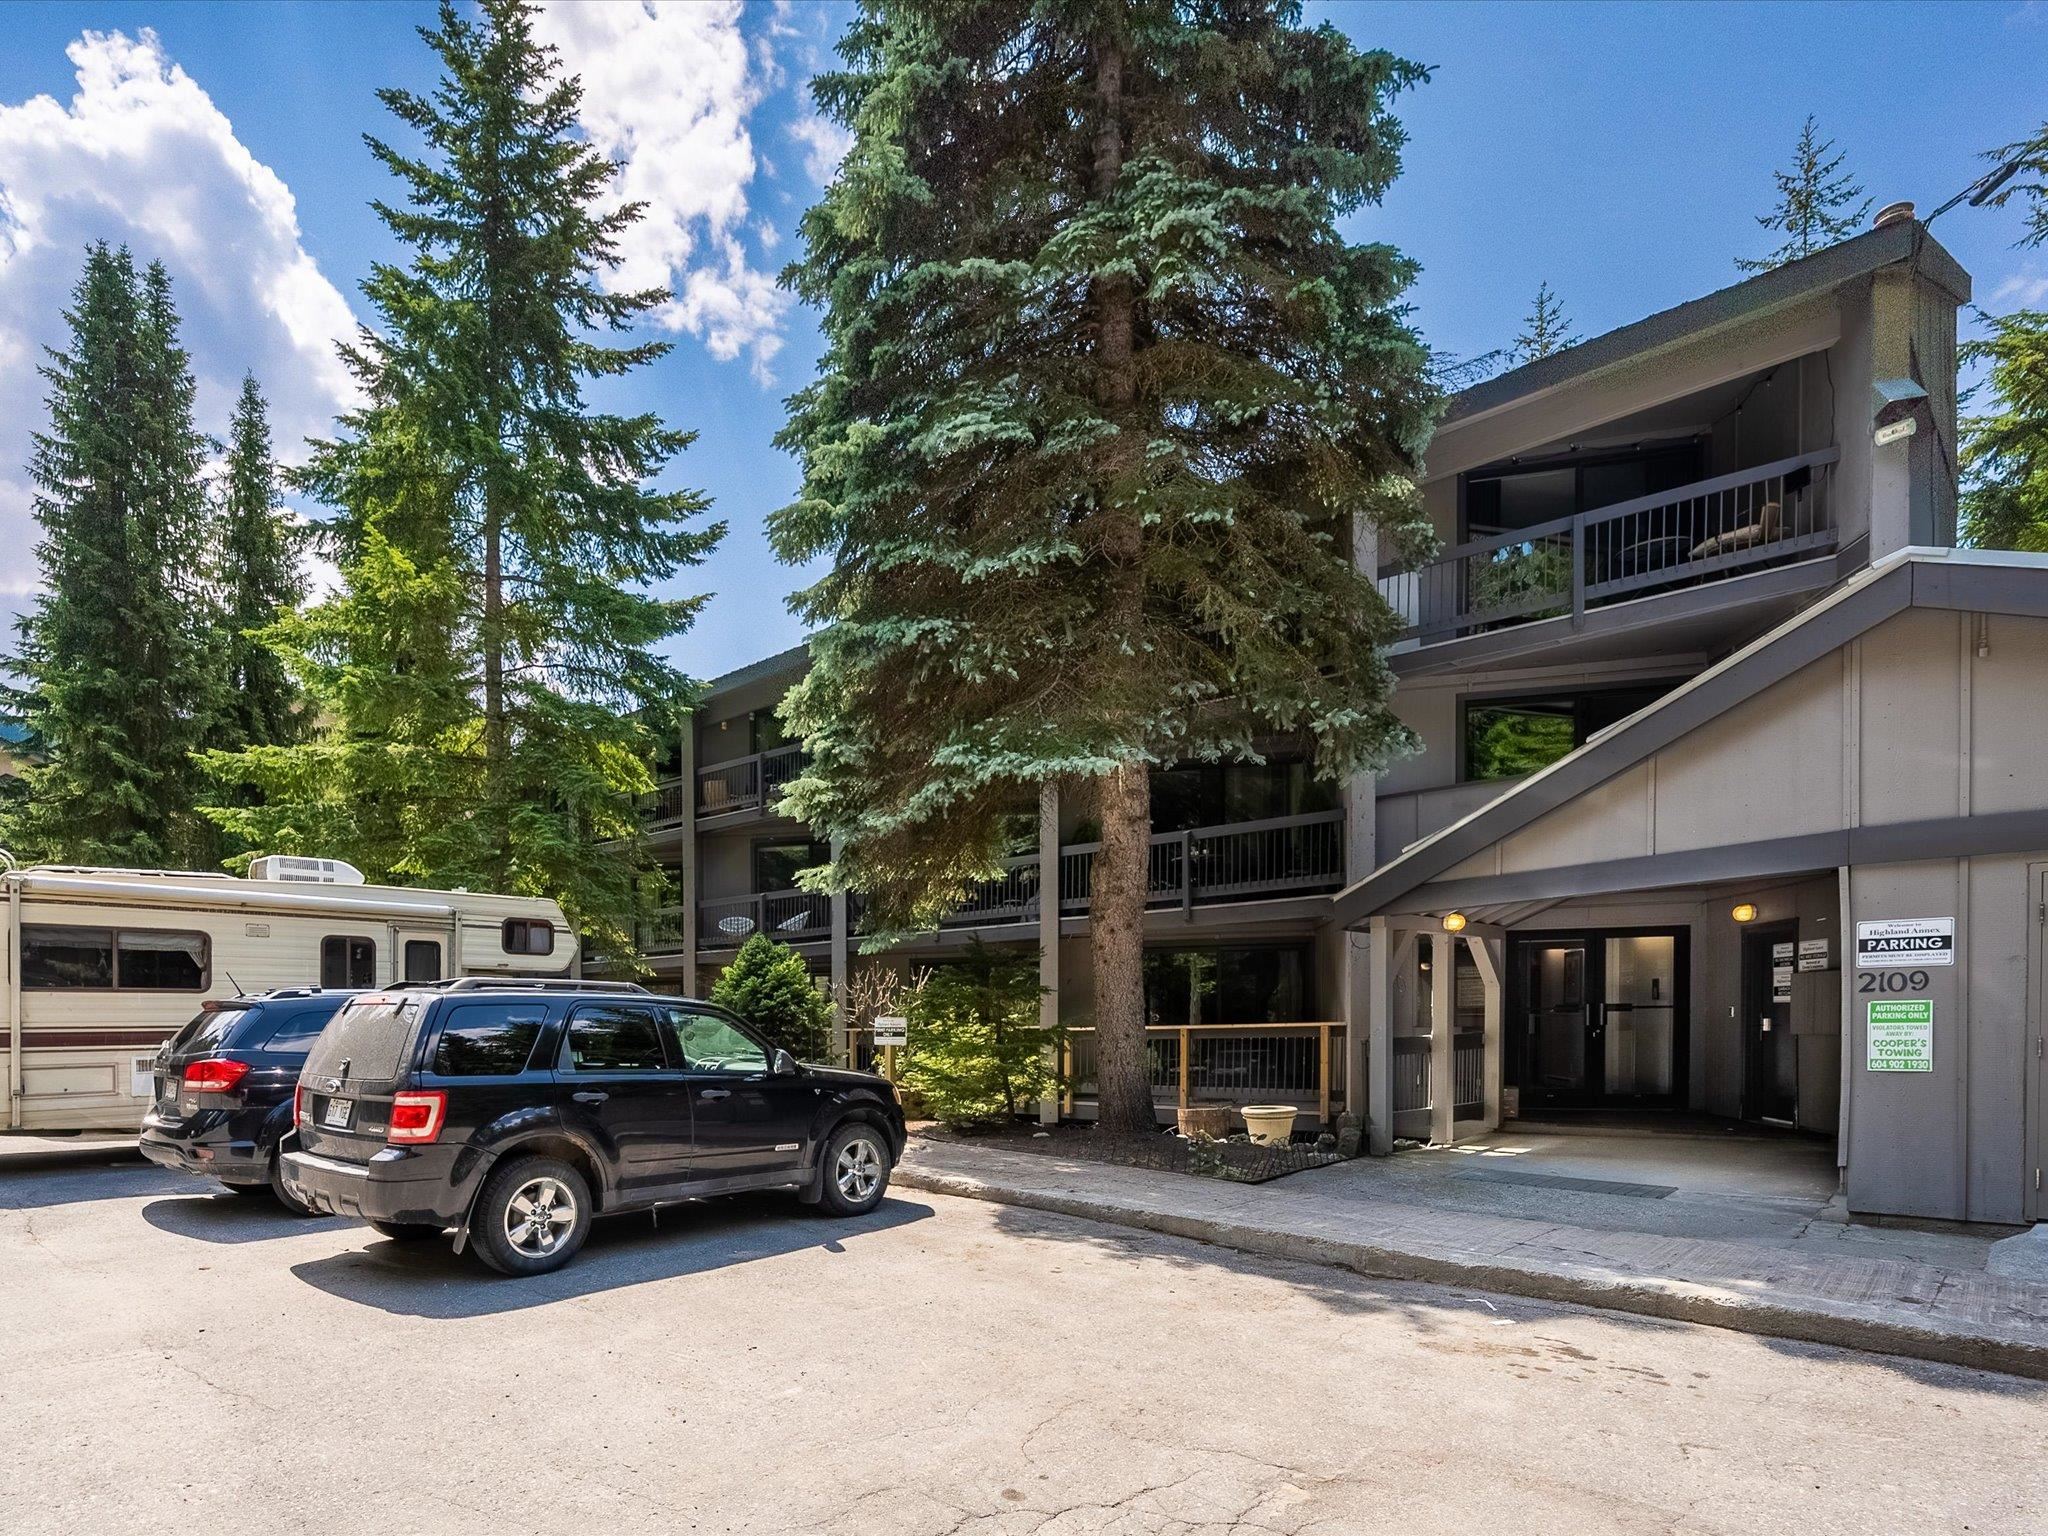 Listing image of 103 2109 WHISTLER ROAD